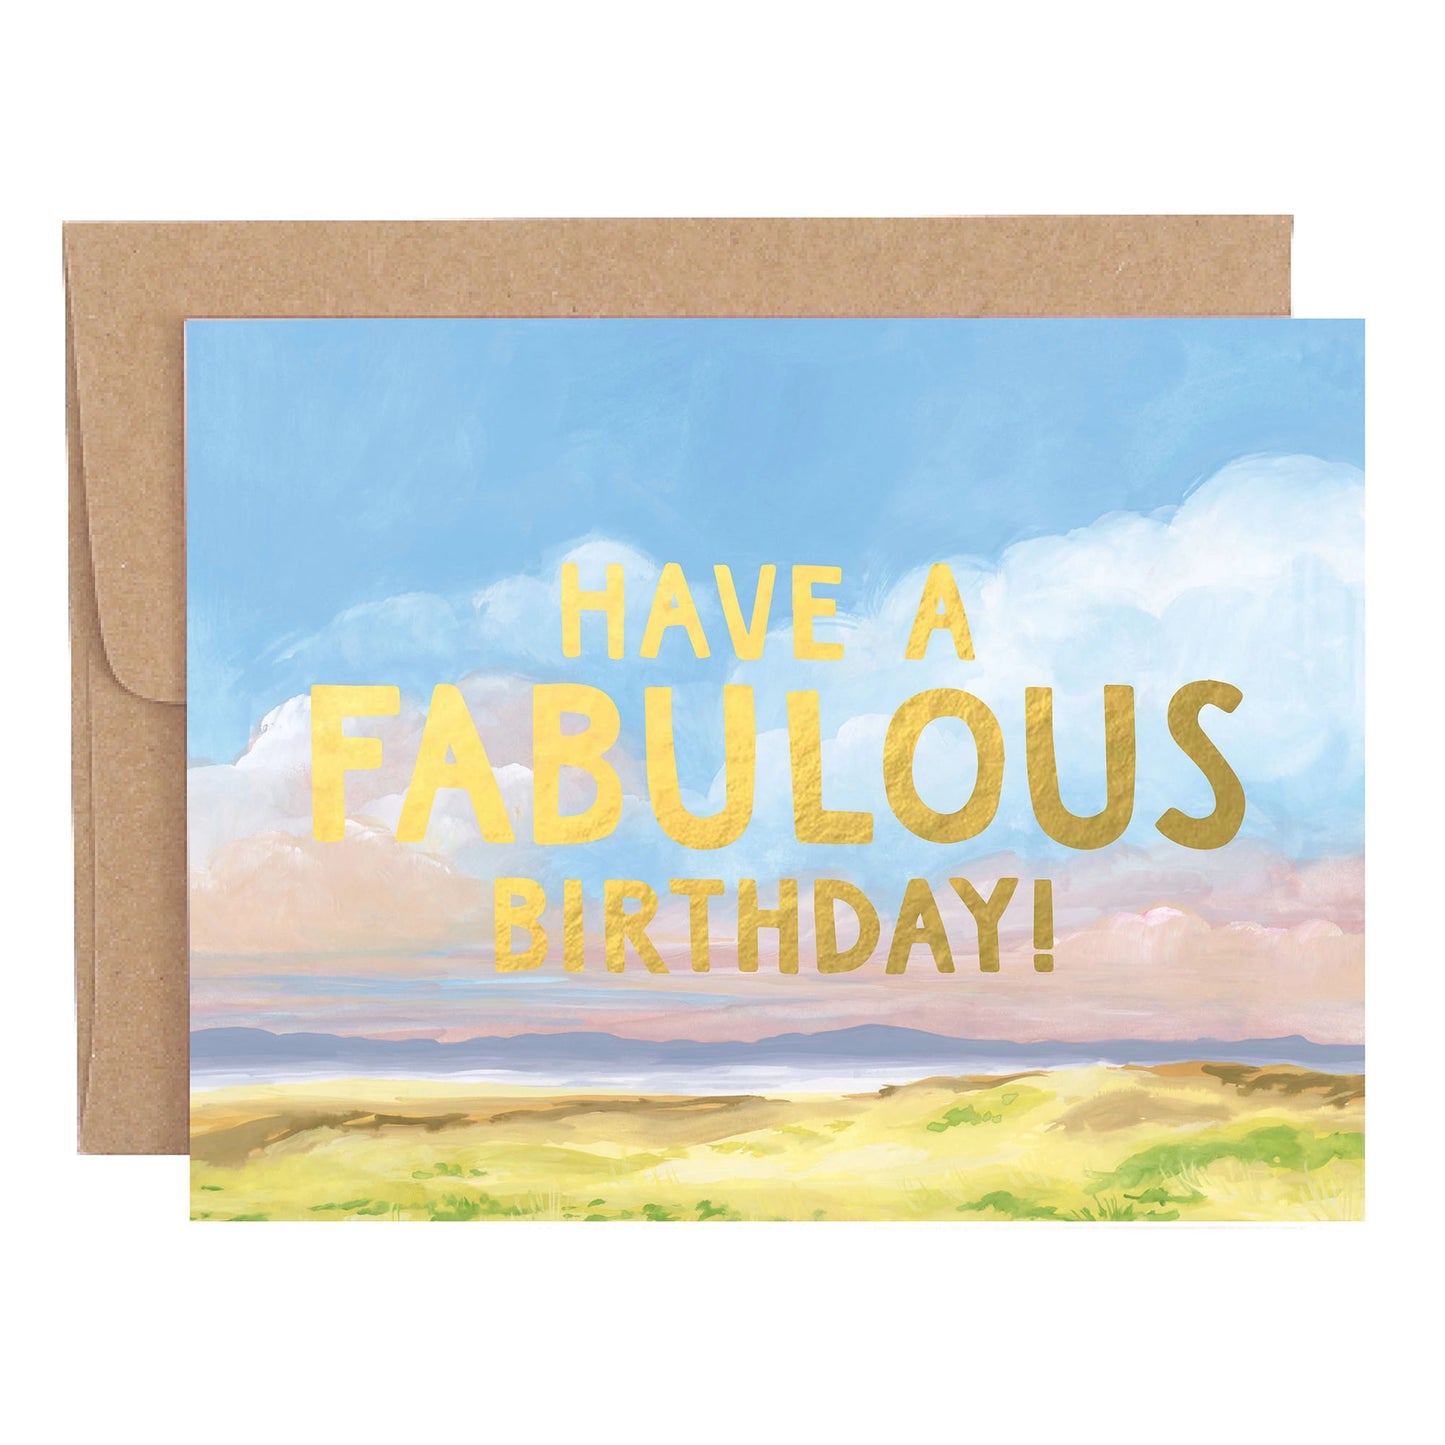 Have a Fabulous Birthday Greeting Card